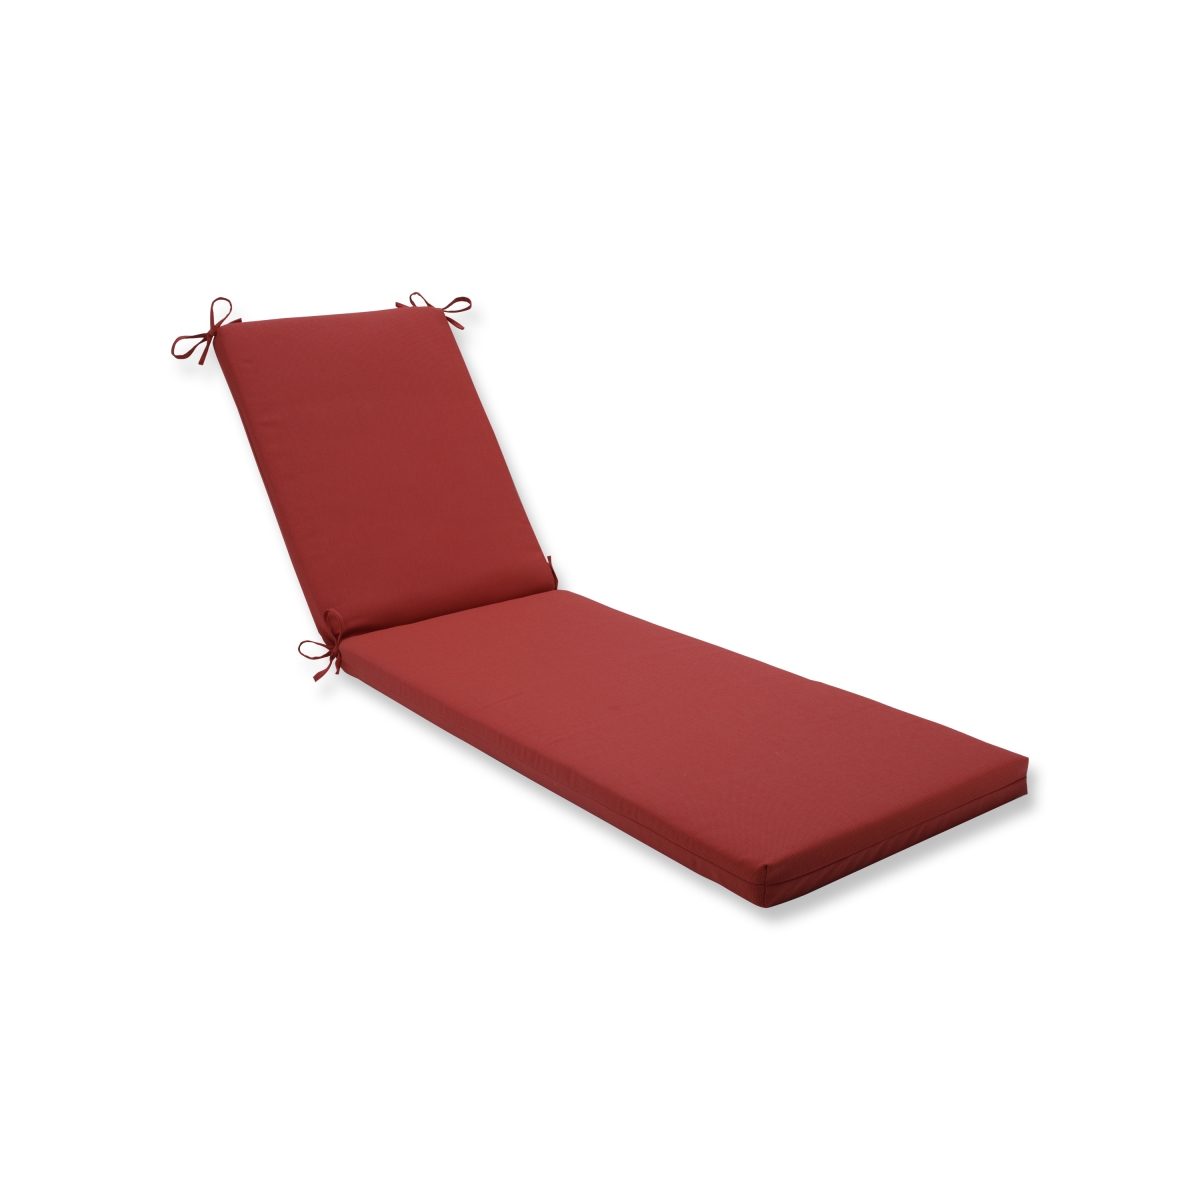 80 X 23 X 3 In. Outdoor & Indoor Tweed Chaise Lounge Cushion, Red